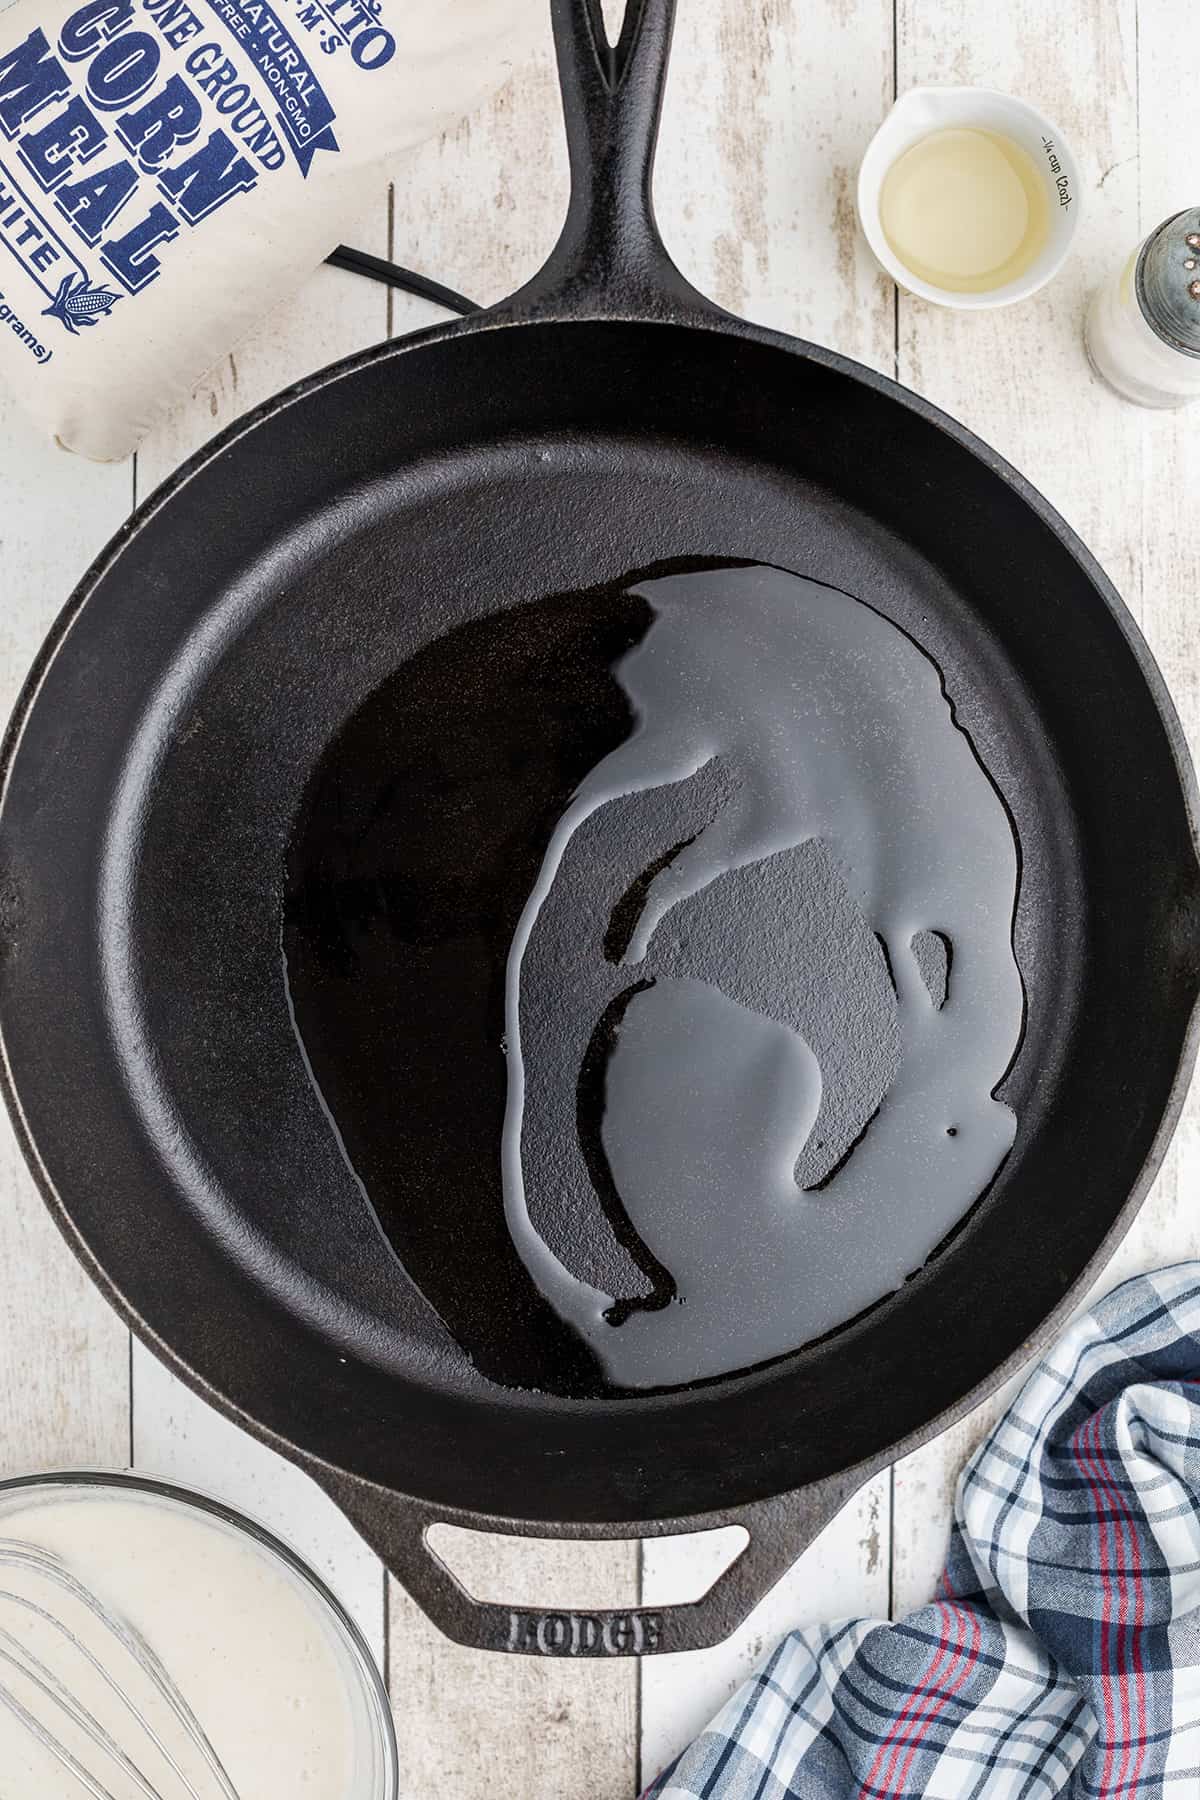 Cooking oil in a cast iron skillet.